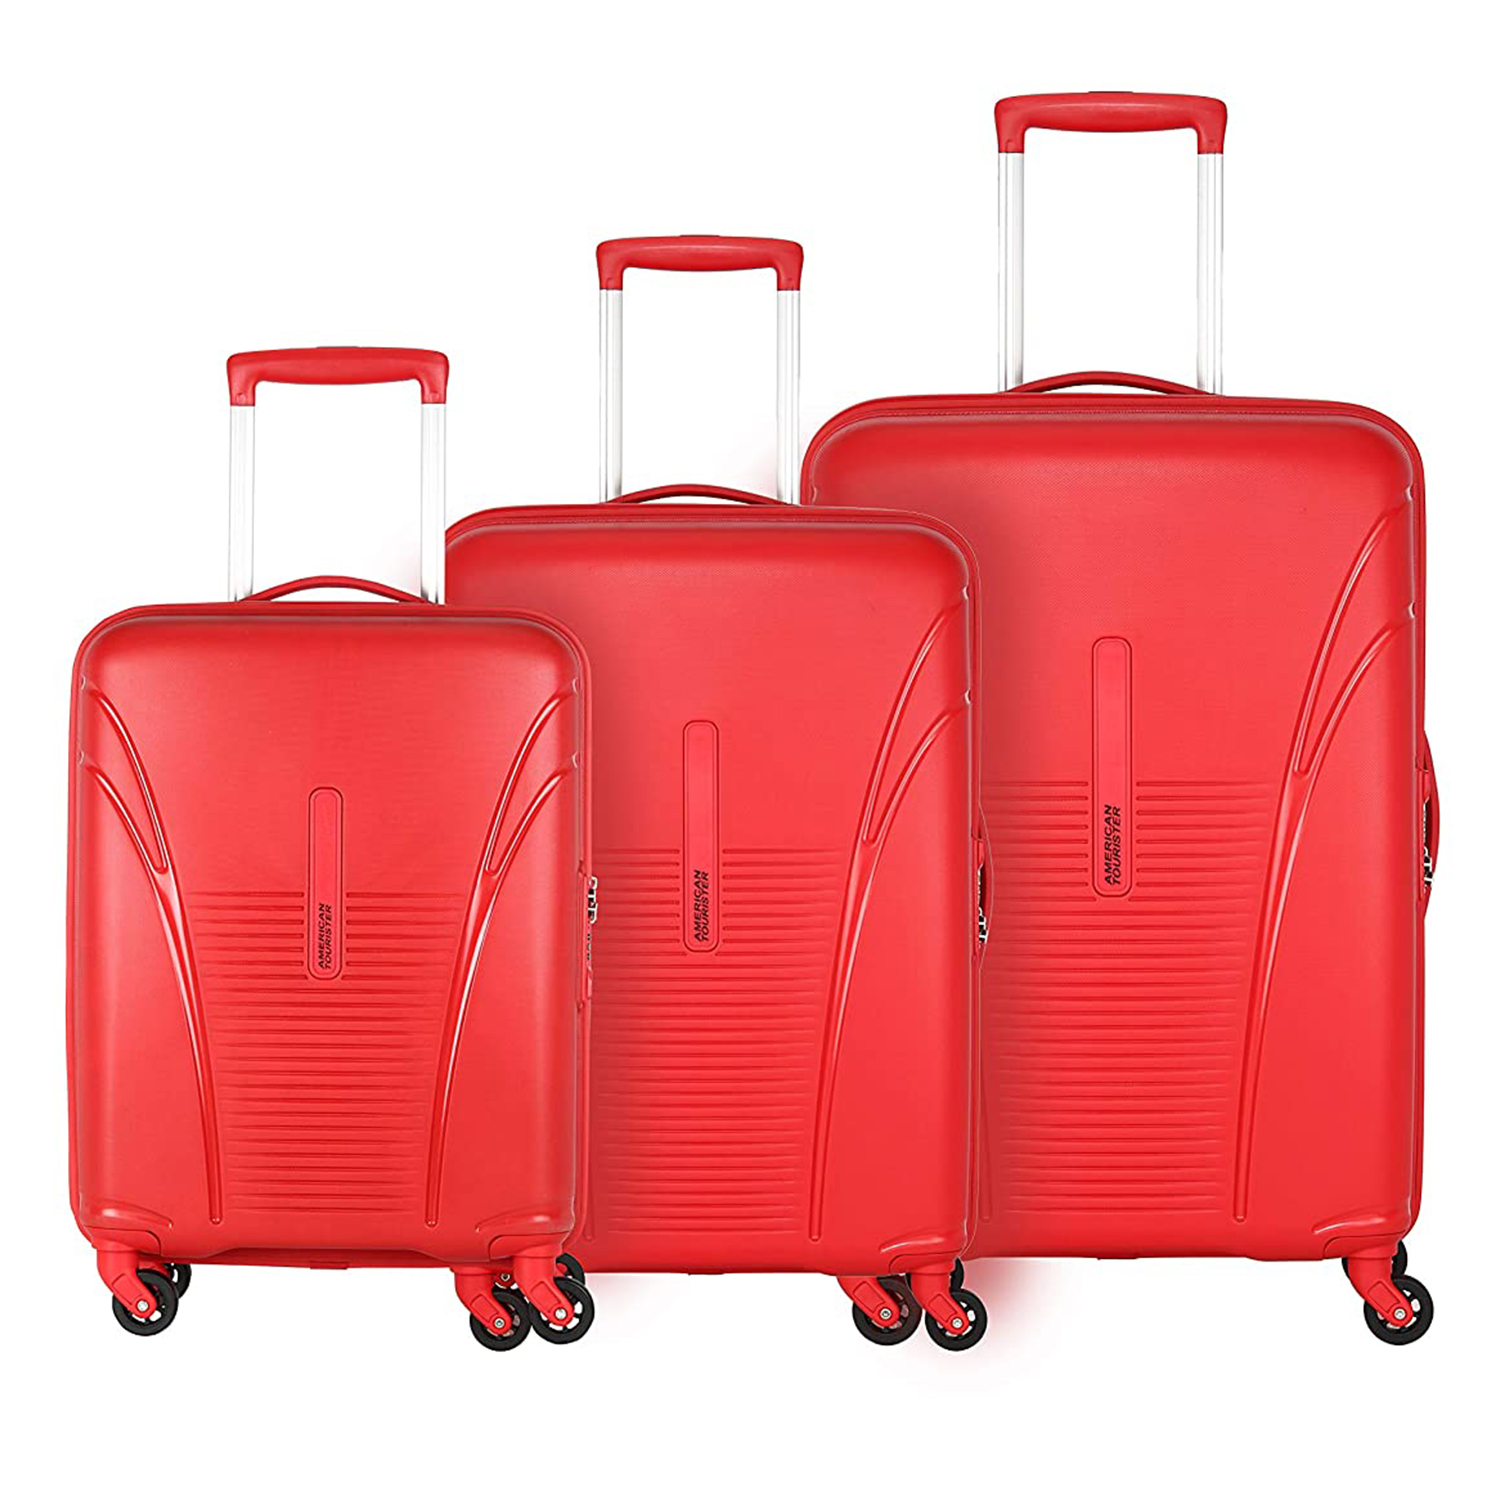 RoshanBags_AMERICAN TOURISTER SKYTRACER V1 RED SET OF 3 STROLLY